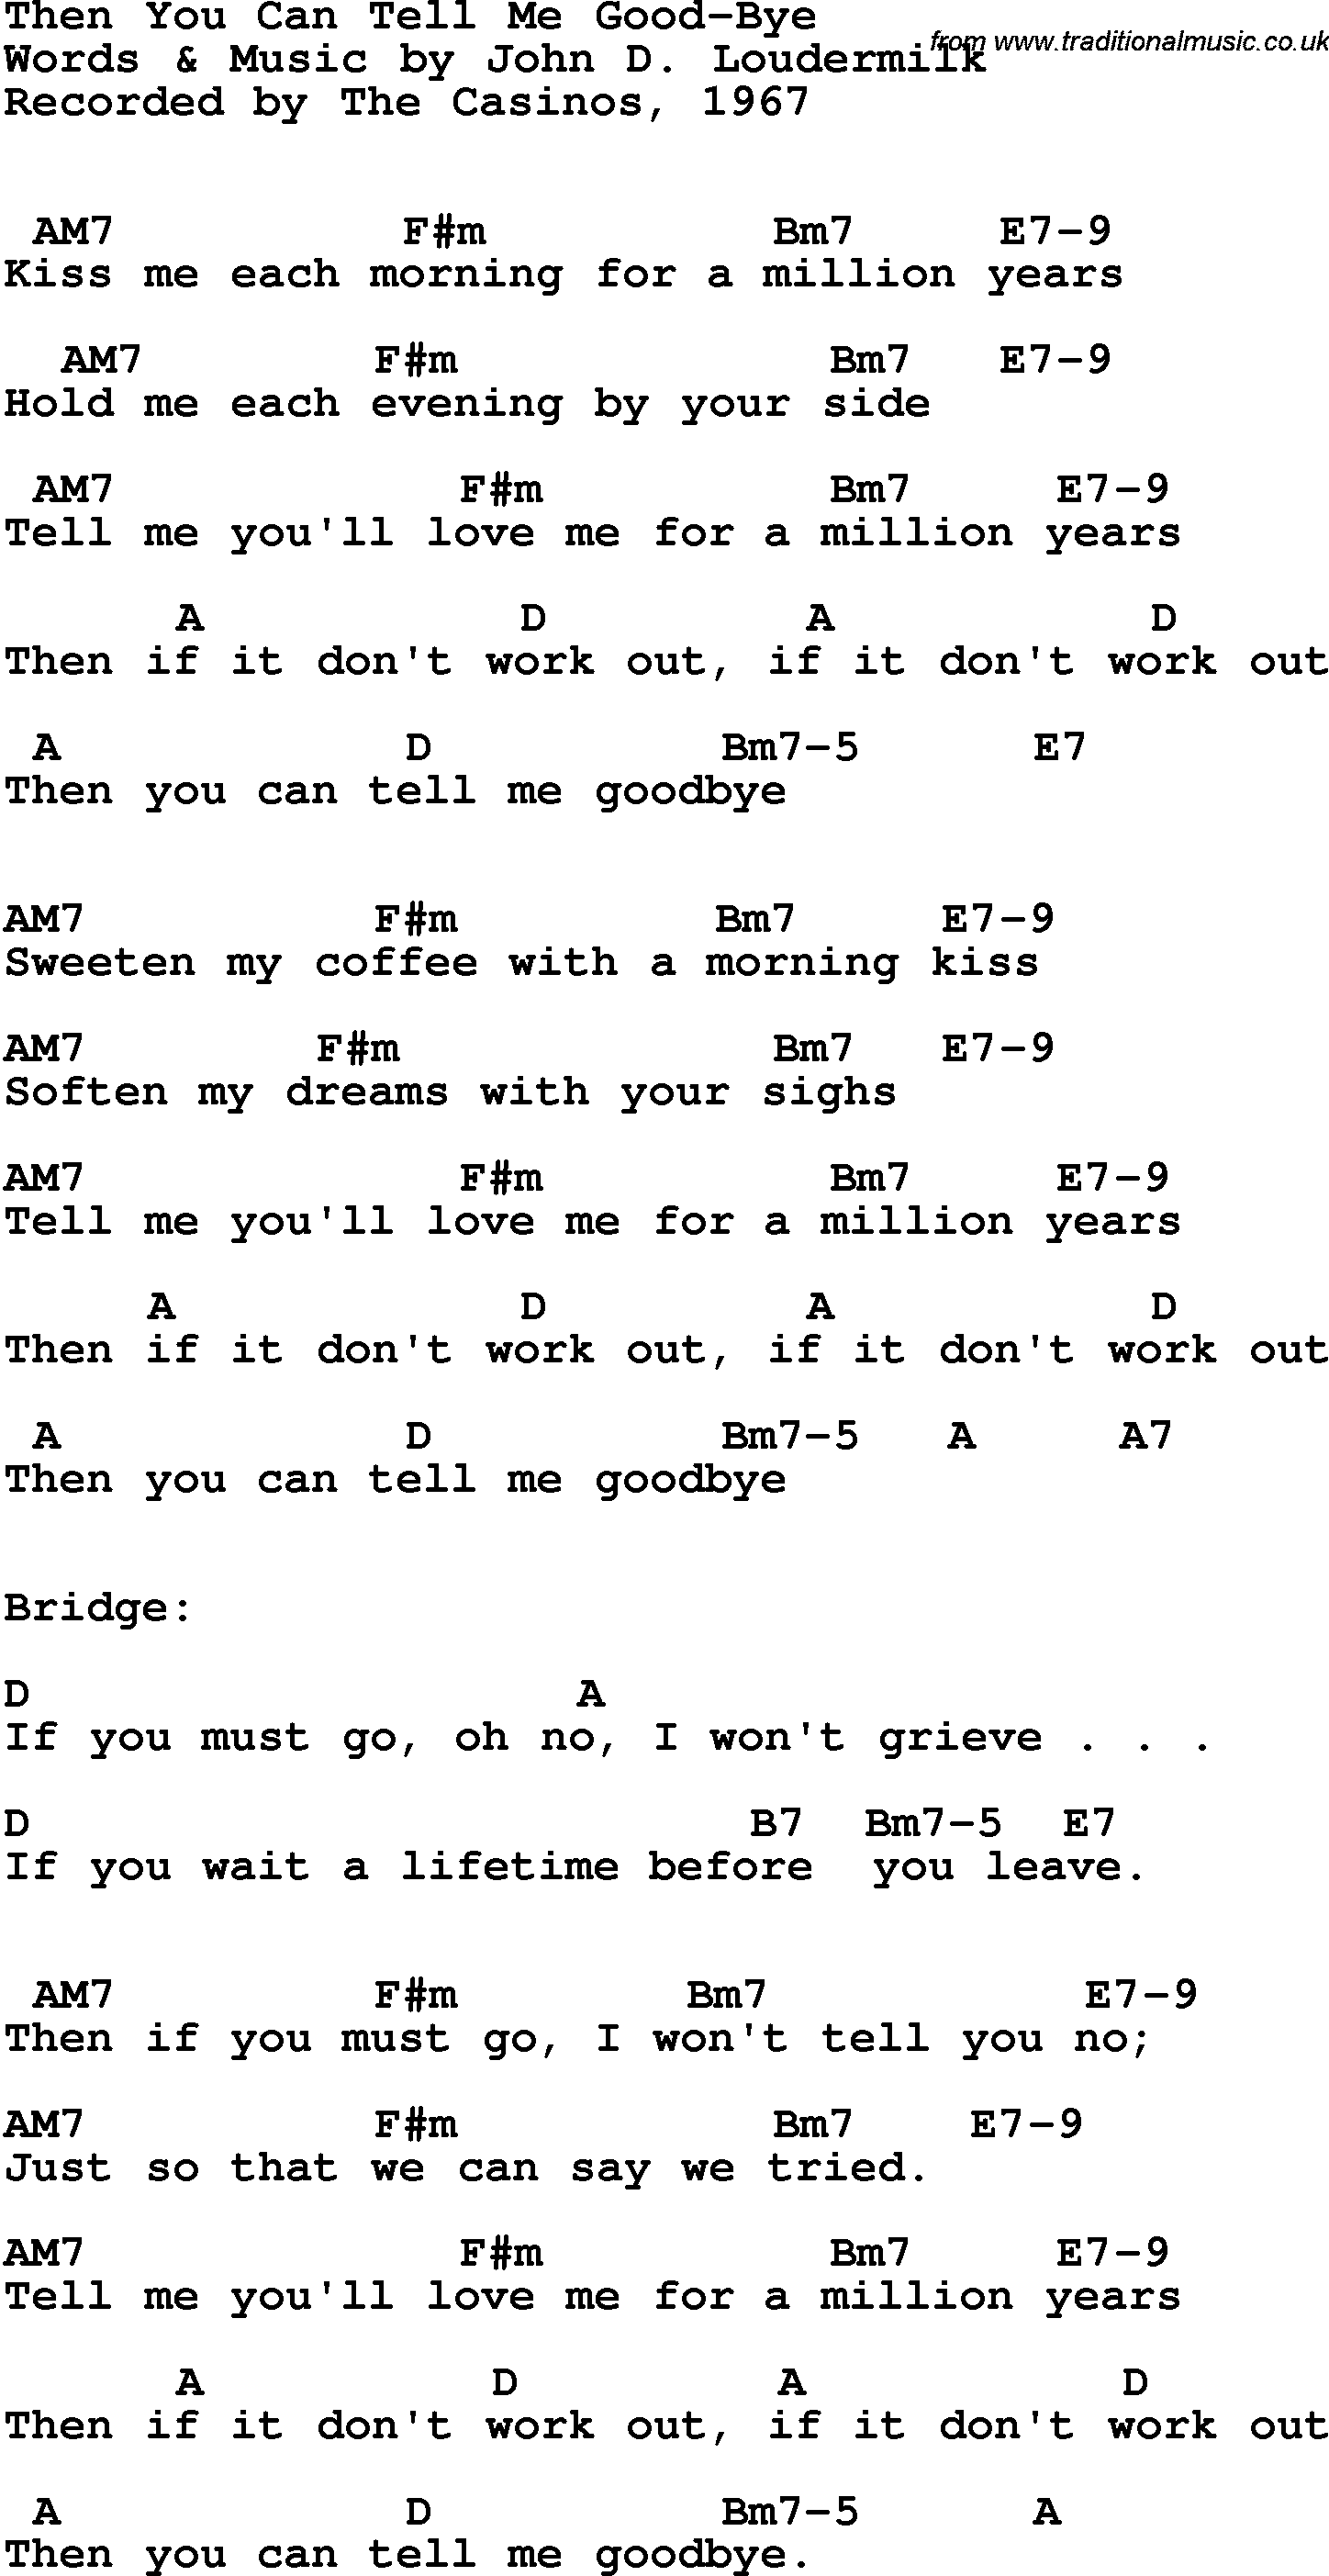 Song Lyrics with guitar chords for Then You Can Tell Me Good-bye - The Casinos, 1967